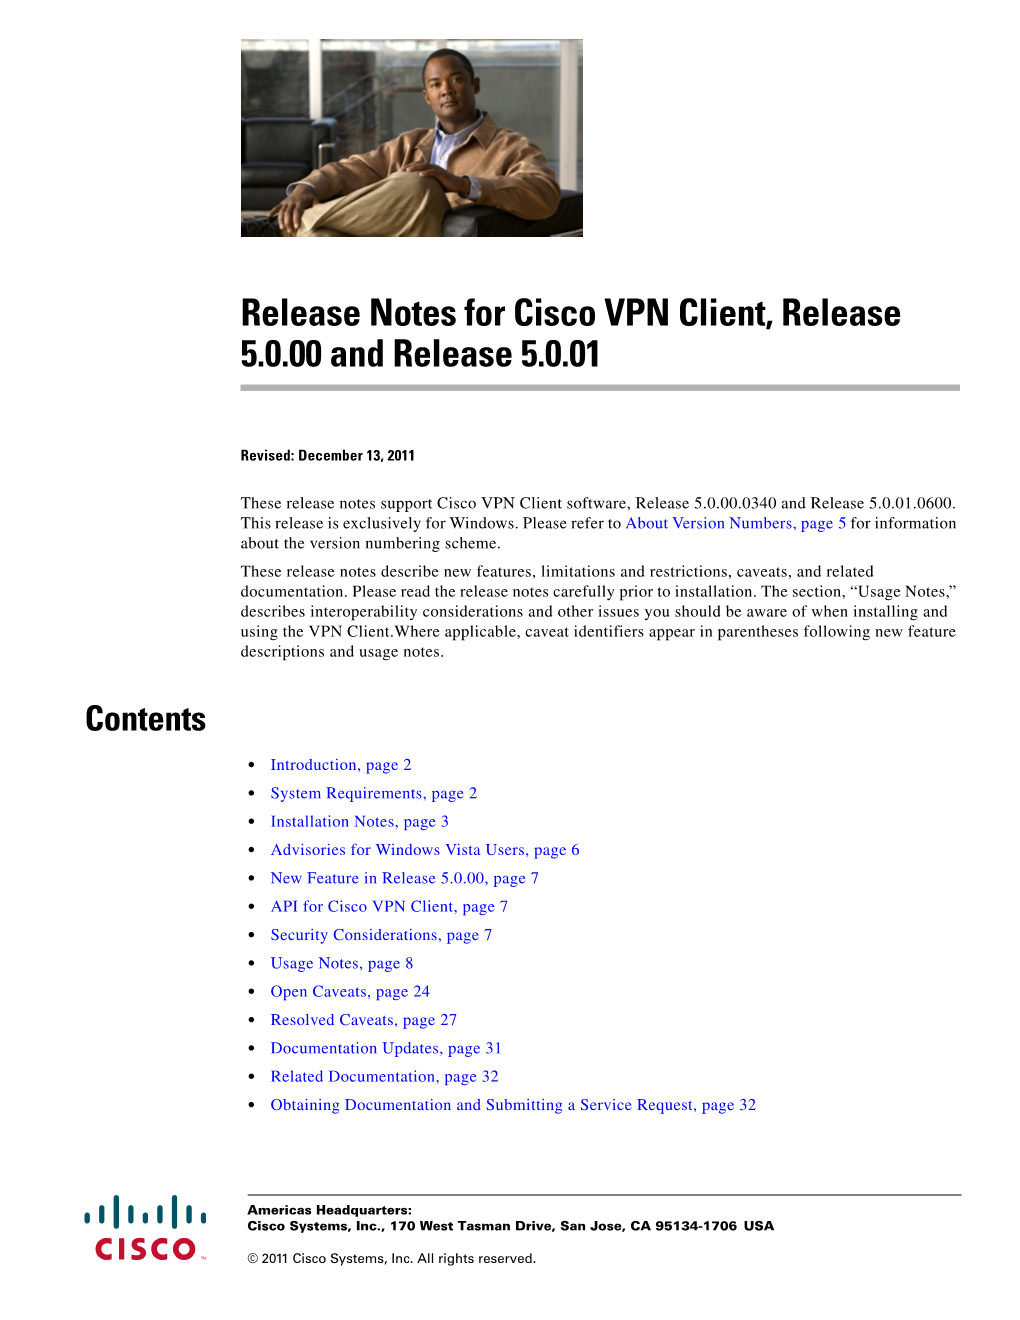 Release Notes for Cisco VPN Client, Release 5.0.00 and Release 5.0.01